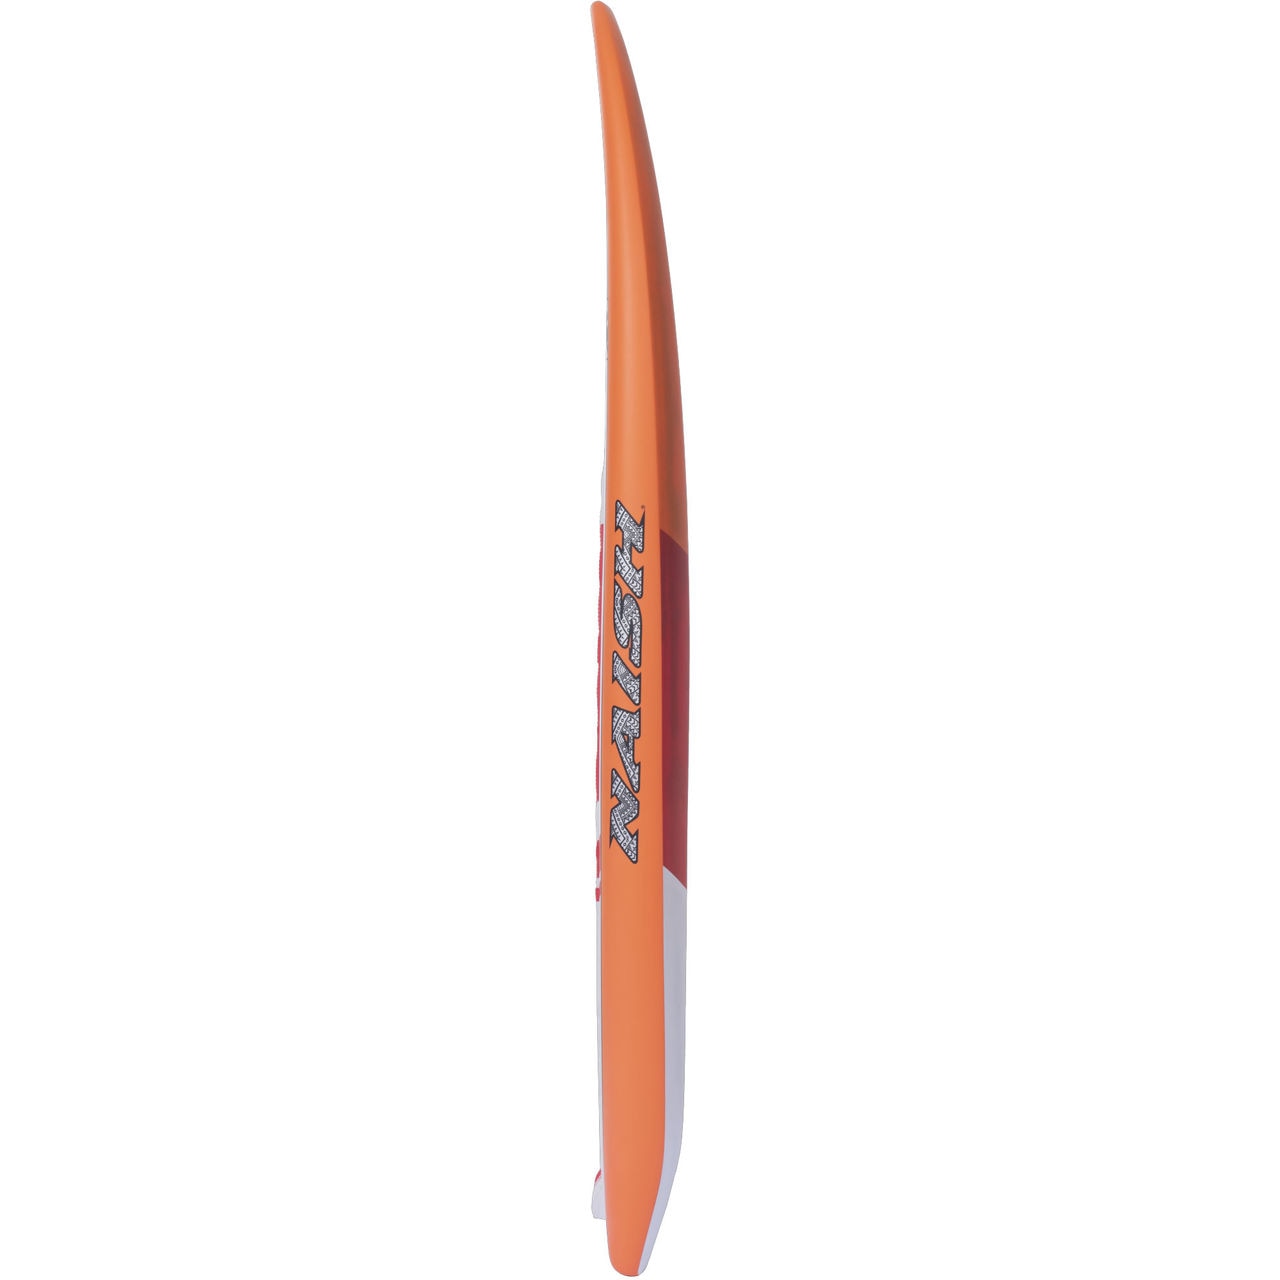 naish-2021-s25-hover-wing-sup-carbon-ultra-foil-40-side__87917.1593458713